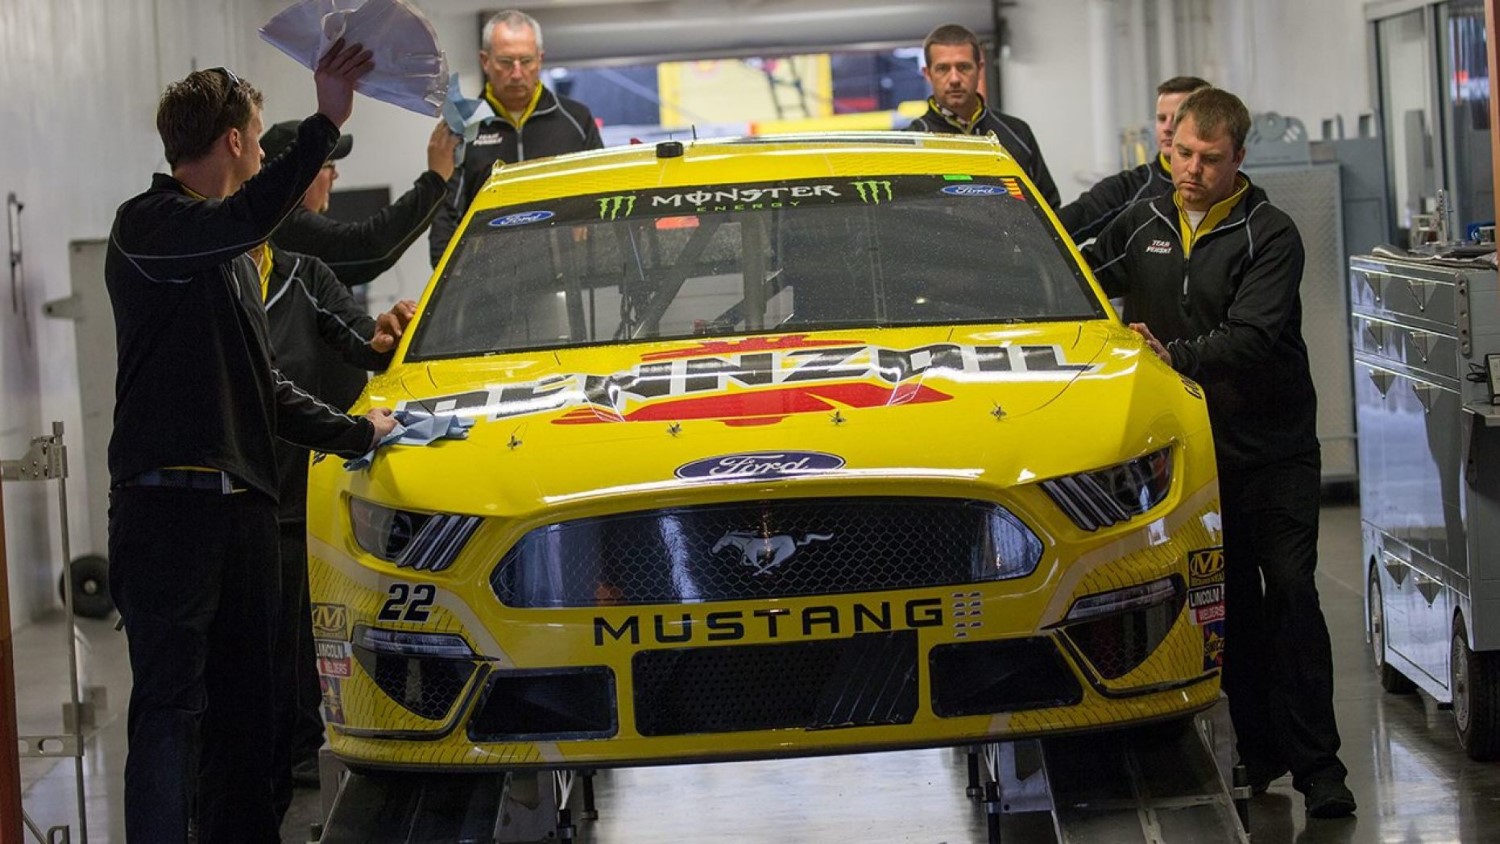 Cars go through a tech inspection before every race. (Getty Images)